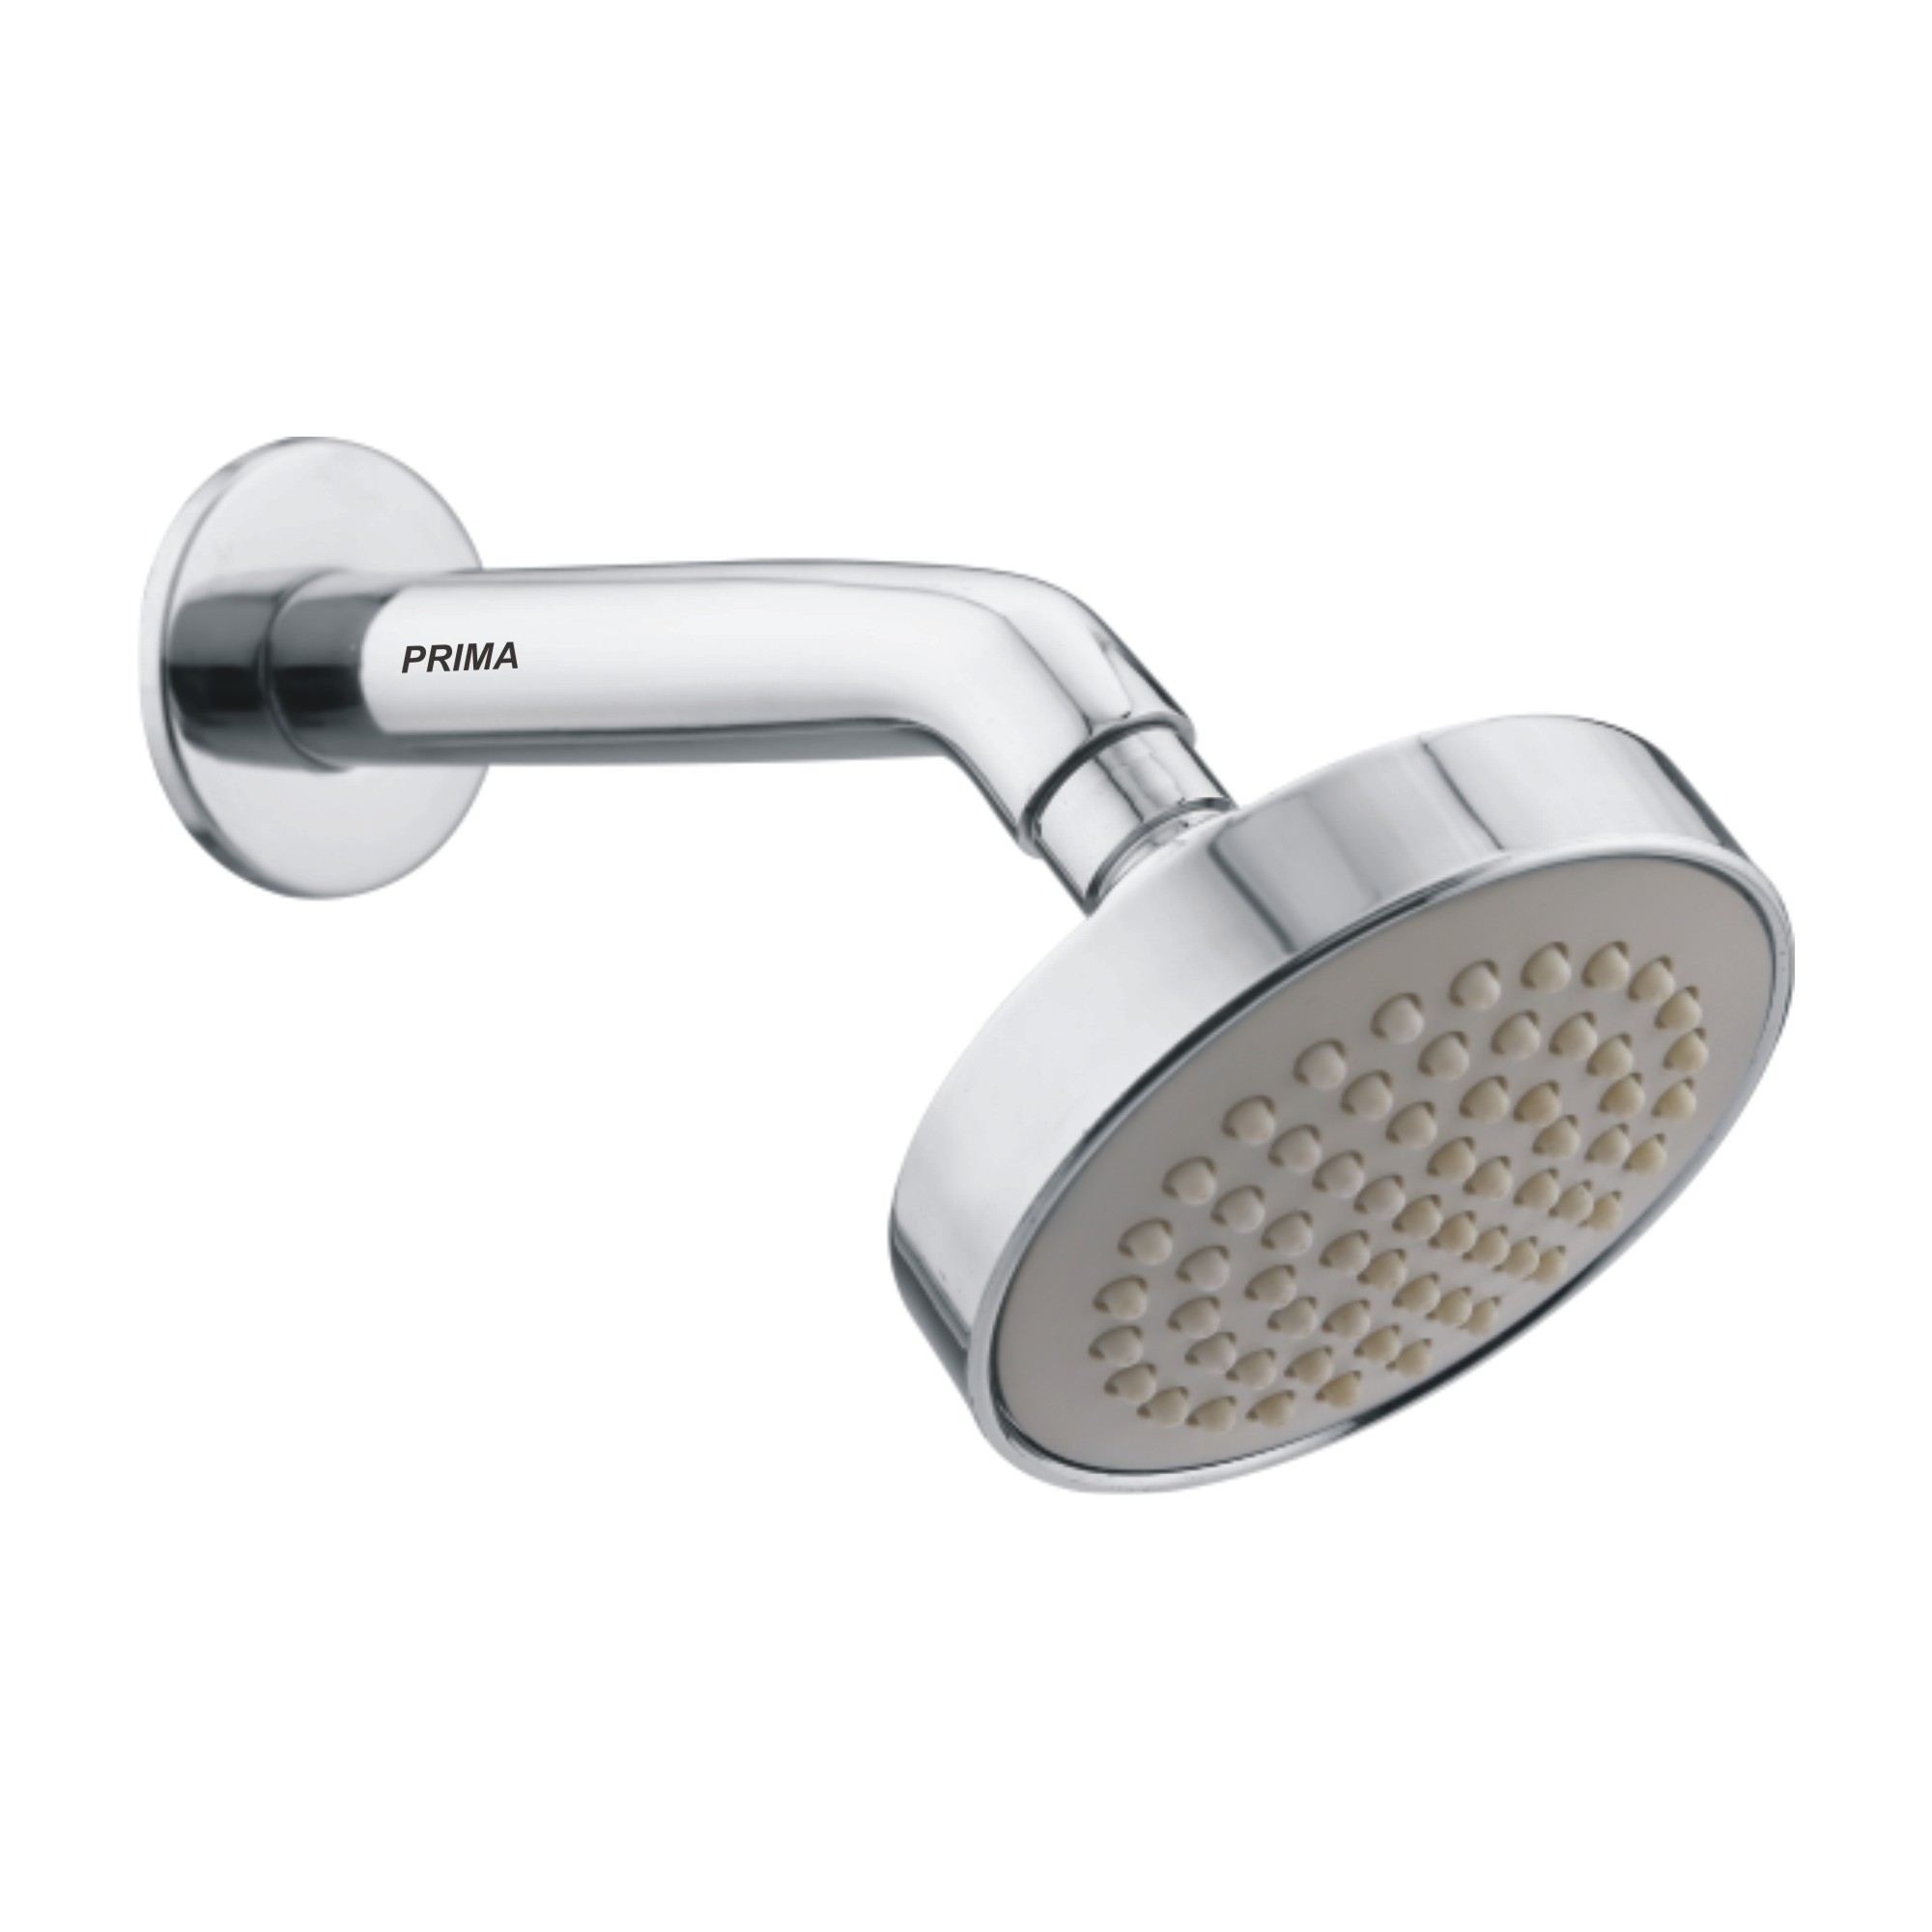 C.P OVERHEAD SHOWER ROUND WITH ARM ( 100 MM) - OMEGA 